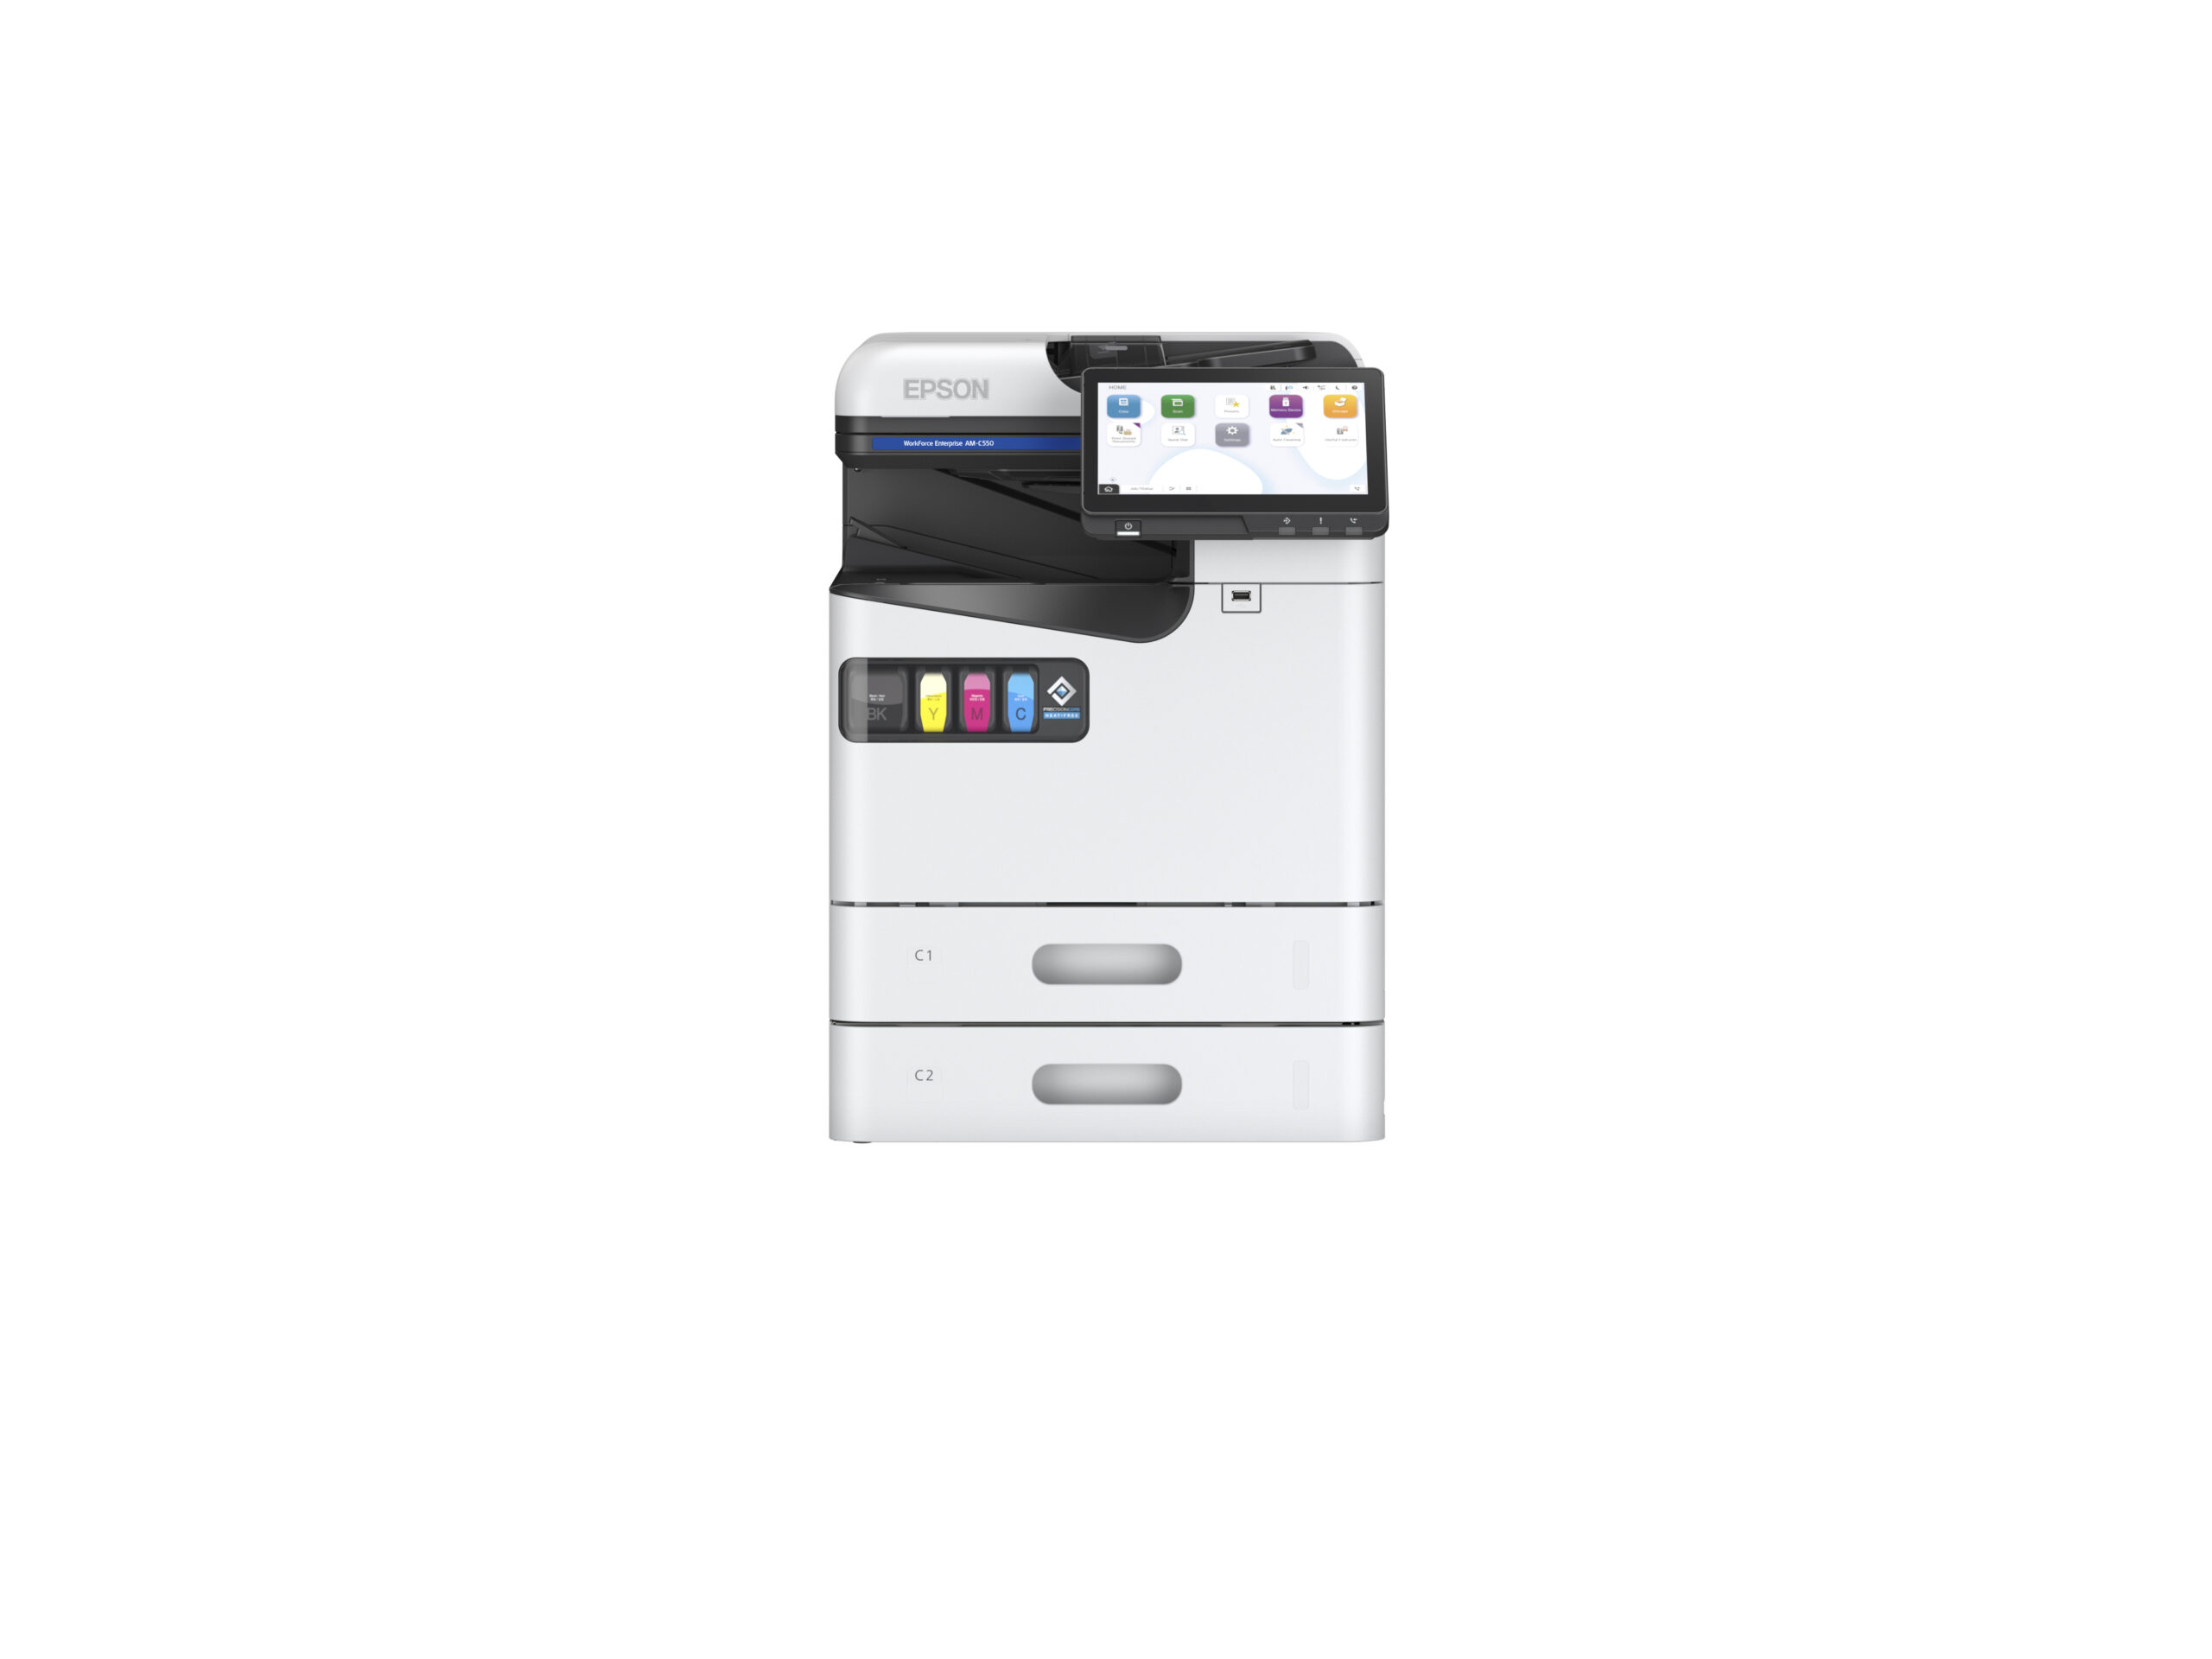 Epson line of products, printers and mfp, color, monochrome, projectors, scanners, renewed office equipment, managed print services, repairs, maintenance